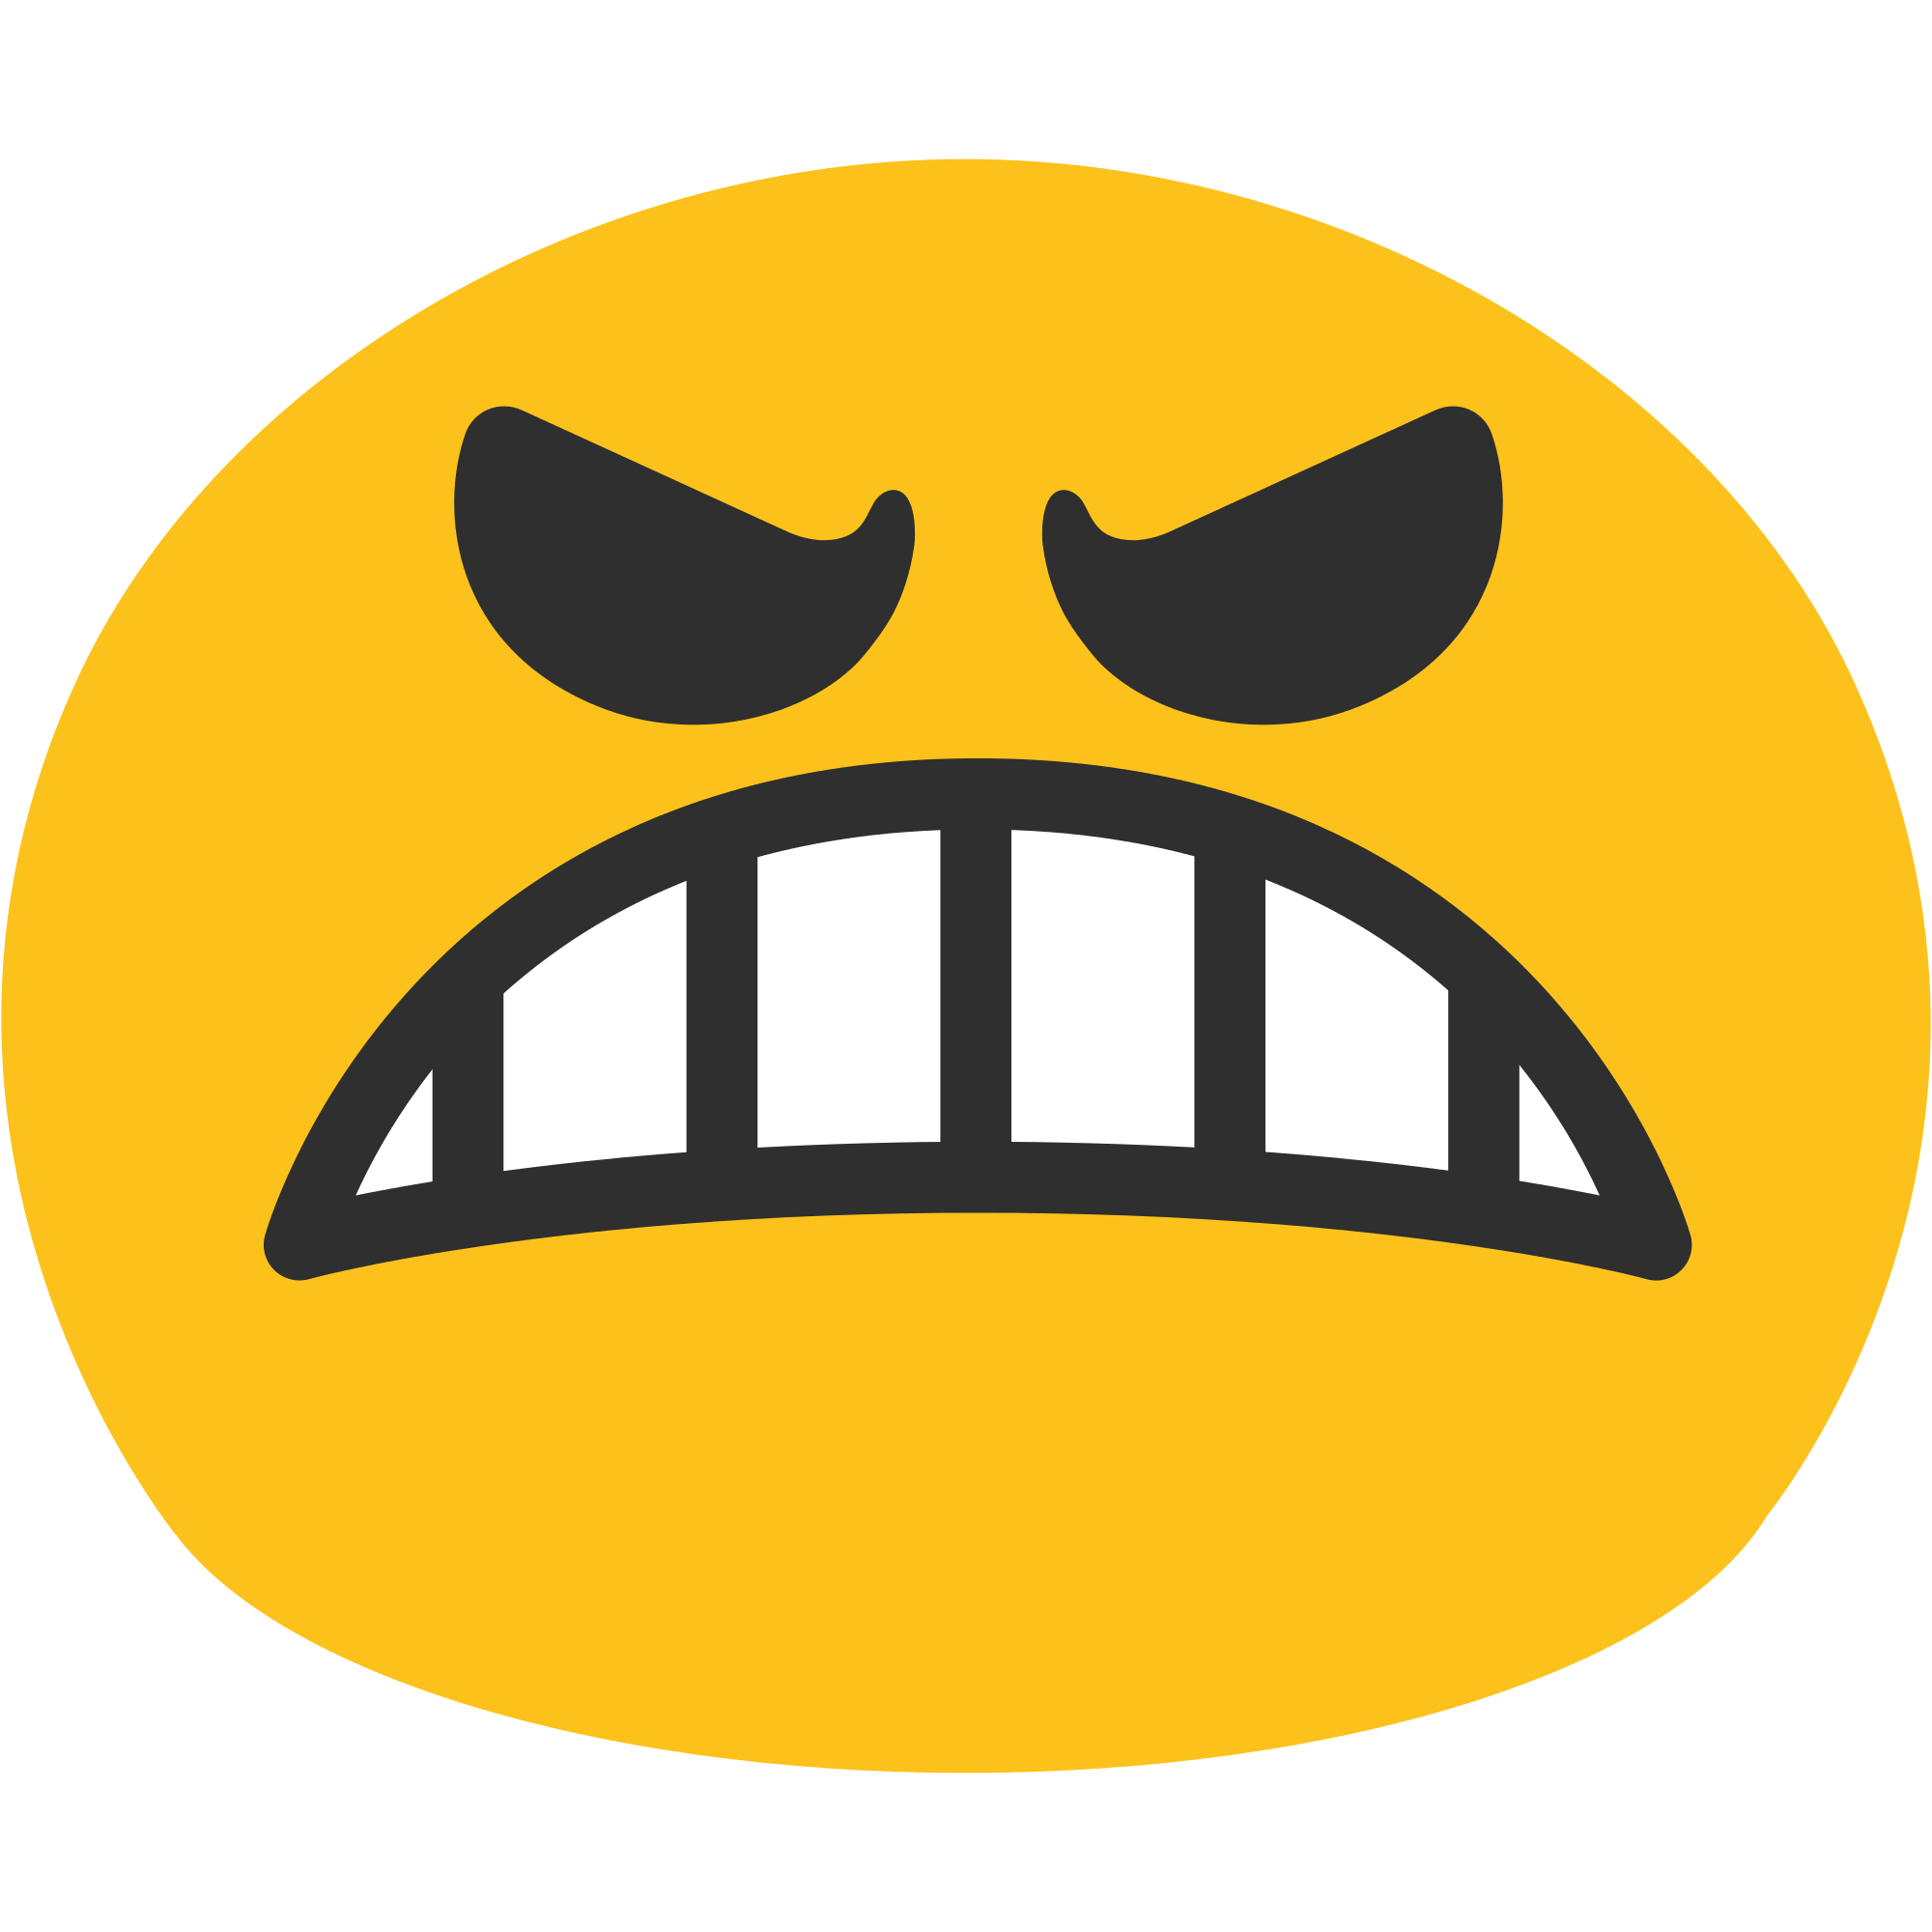 Mad clipart angry emoticon. Emoji transparent background png